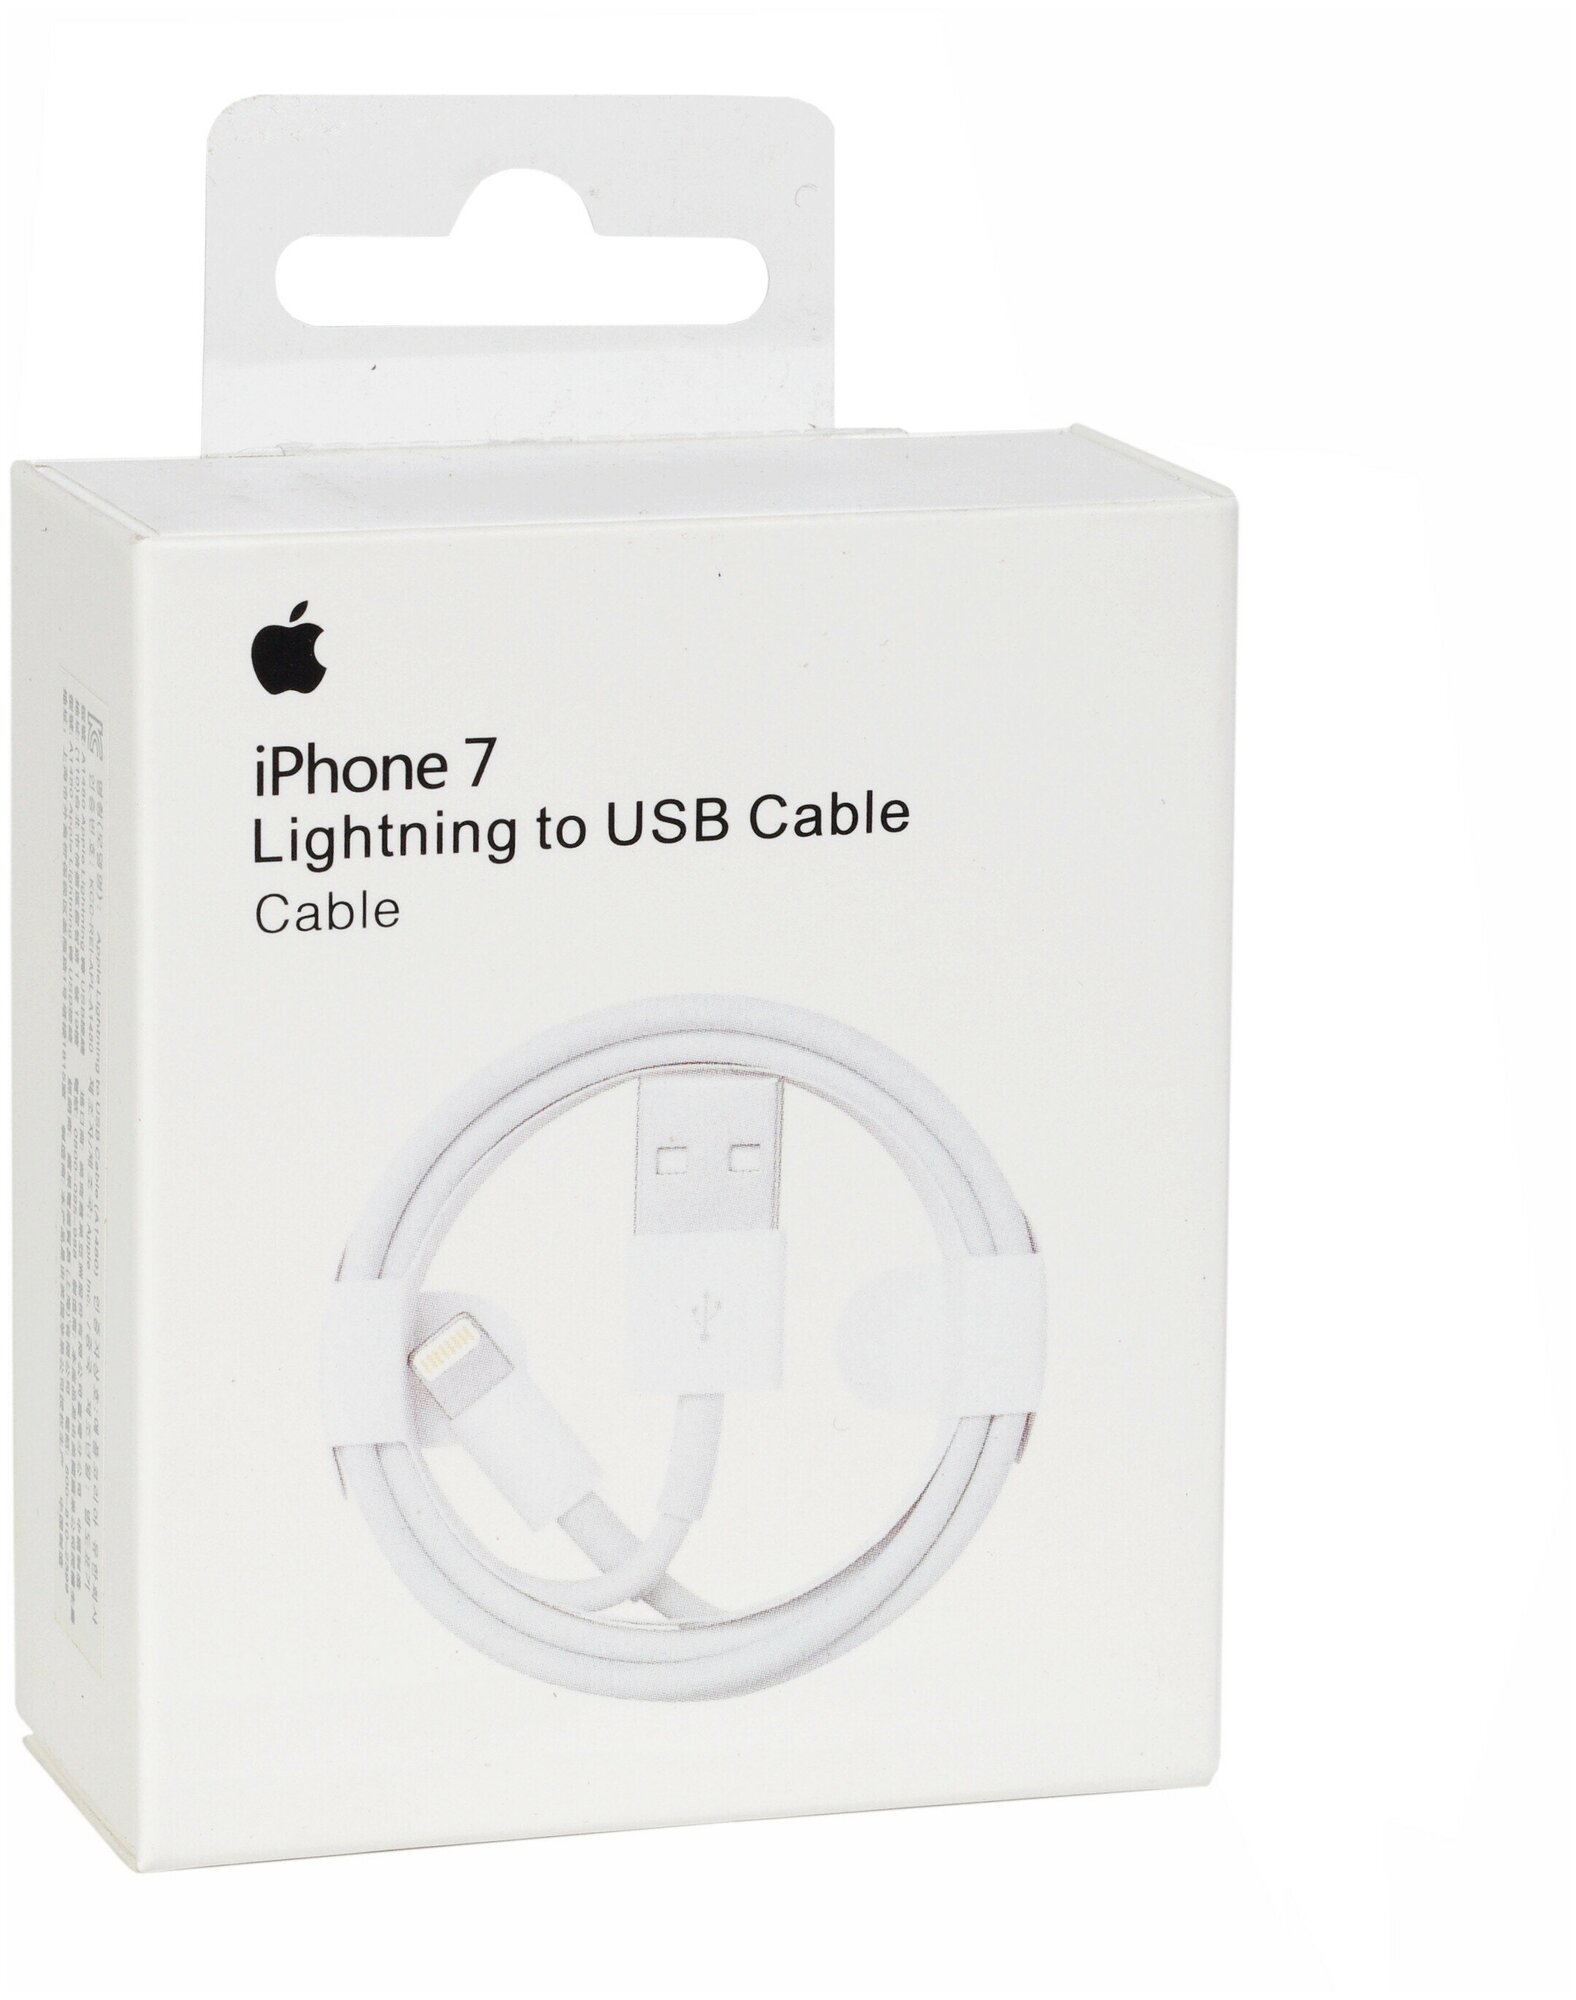 Кабель Lightning to USB Cable (1m) 8 pin для Apple iPhone 5 5S 5C SE 6 6S 7 7 Plus 8 8 Plus X (10) Xr Xs Xs Max 11 11 Pro/12 12 Mini/13 13 Pro Max/14/iPad/iPod/AirPods MD818ZM/A Model A1480